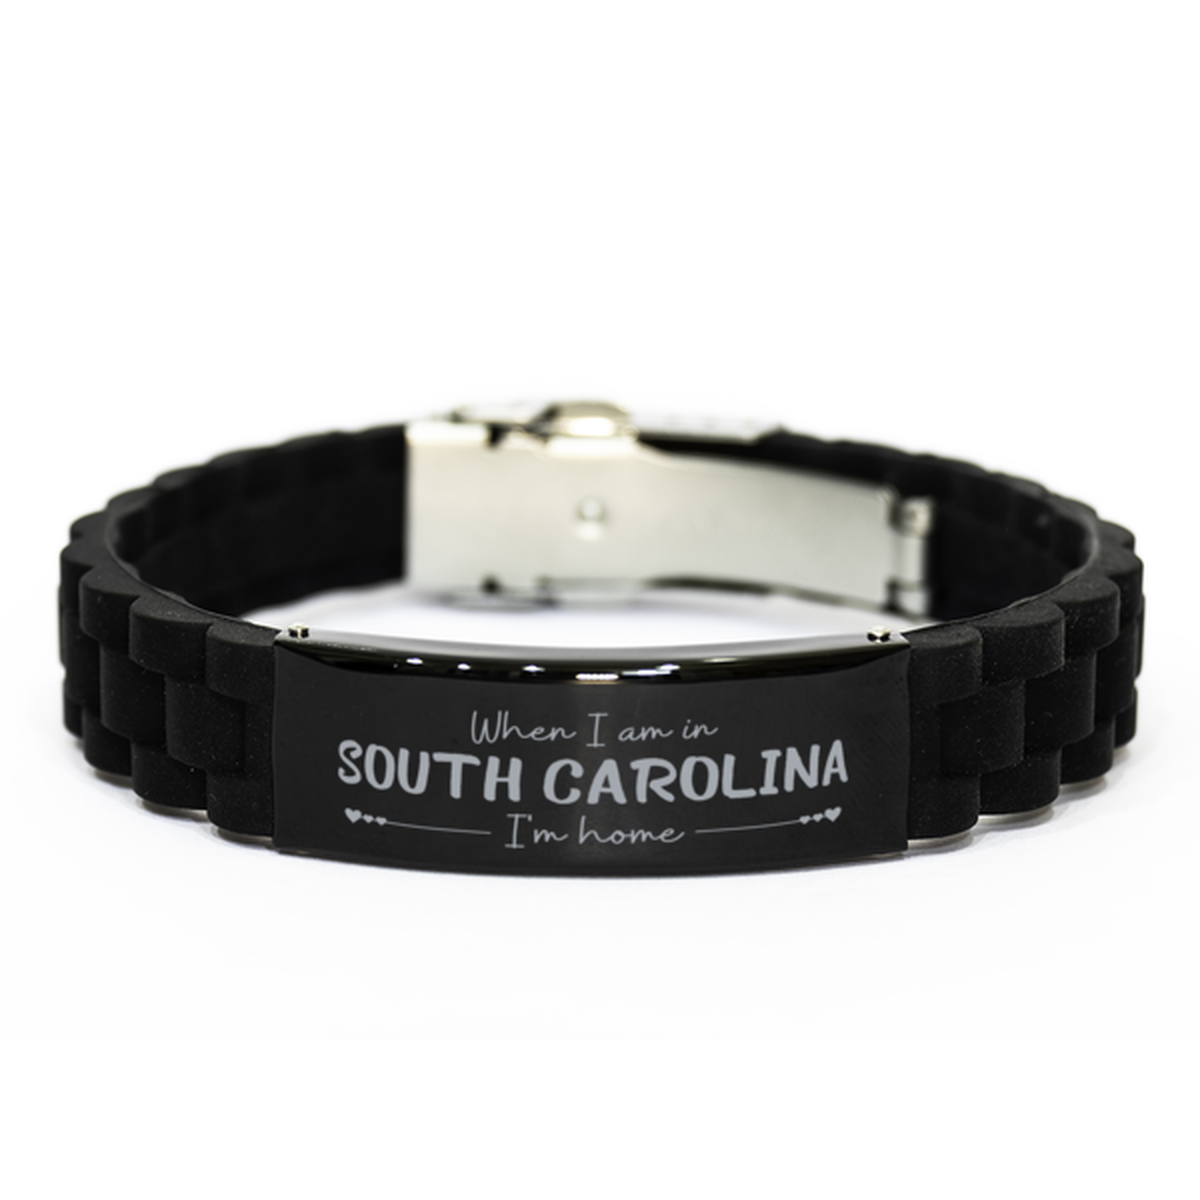 When I am in South Carolina I'm home Black Glidelock Clasp Bracelet, Cheap Gifts For South Carolina, State South Carolina Birthday Gifts for Friends Coworker